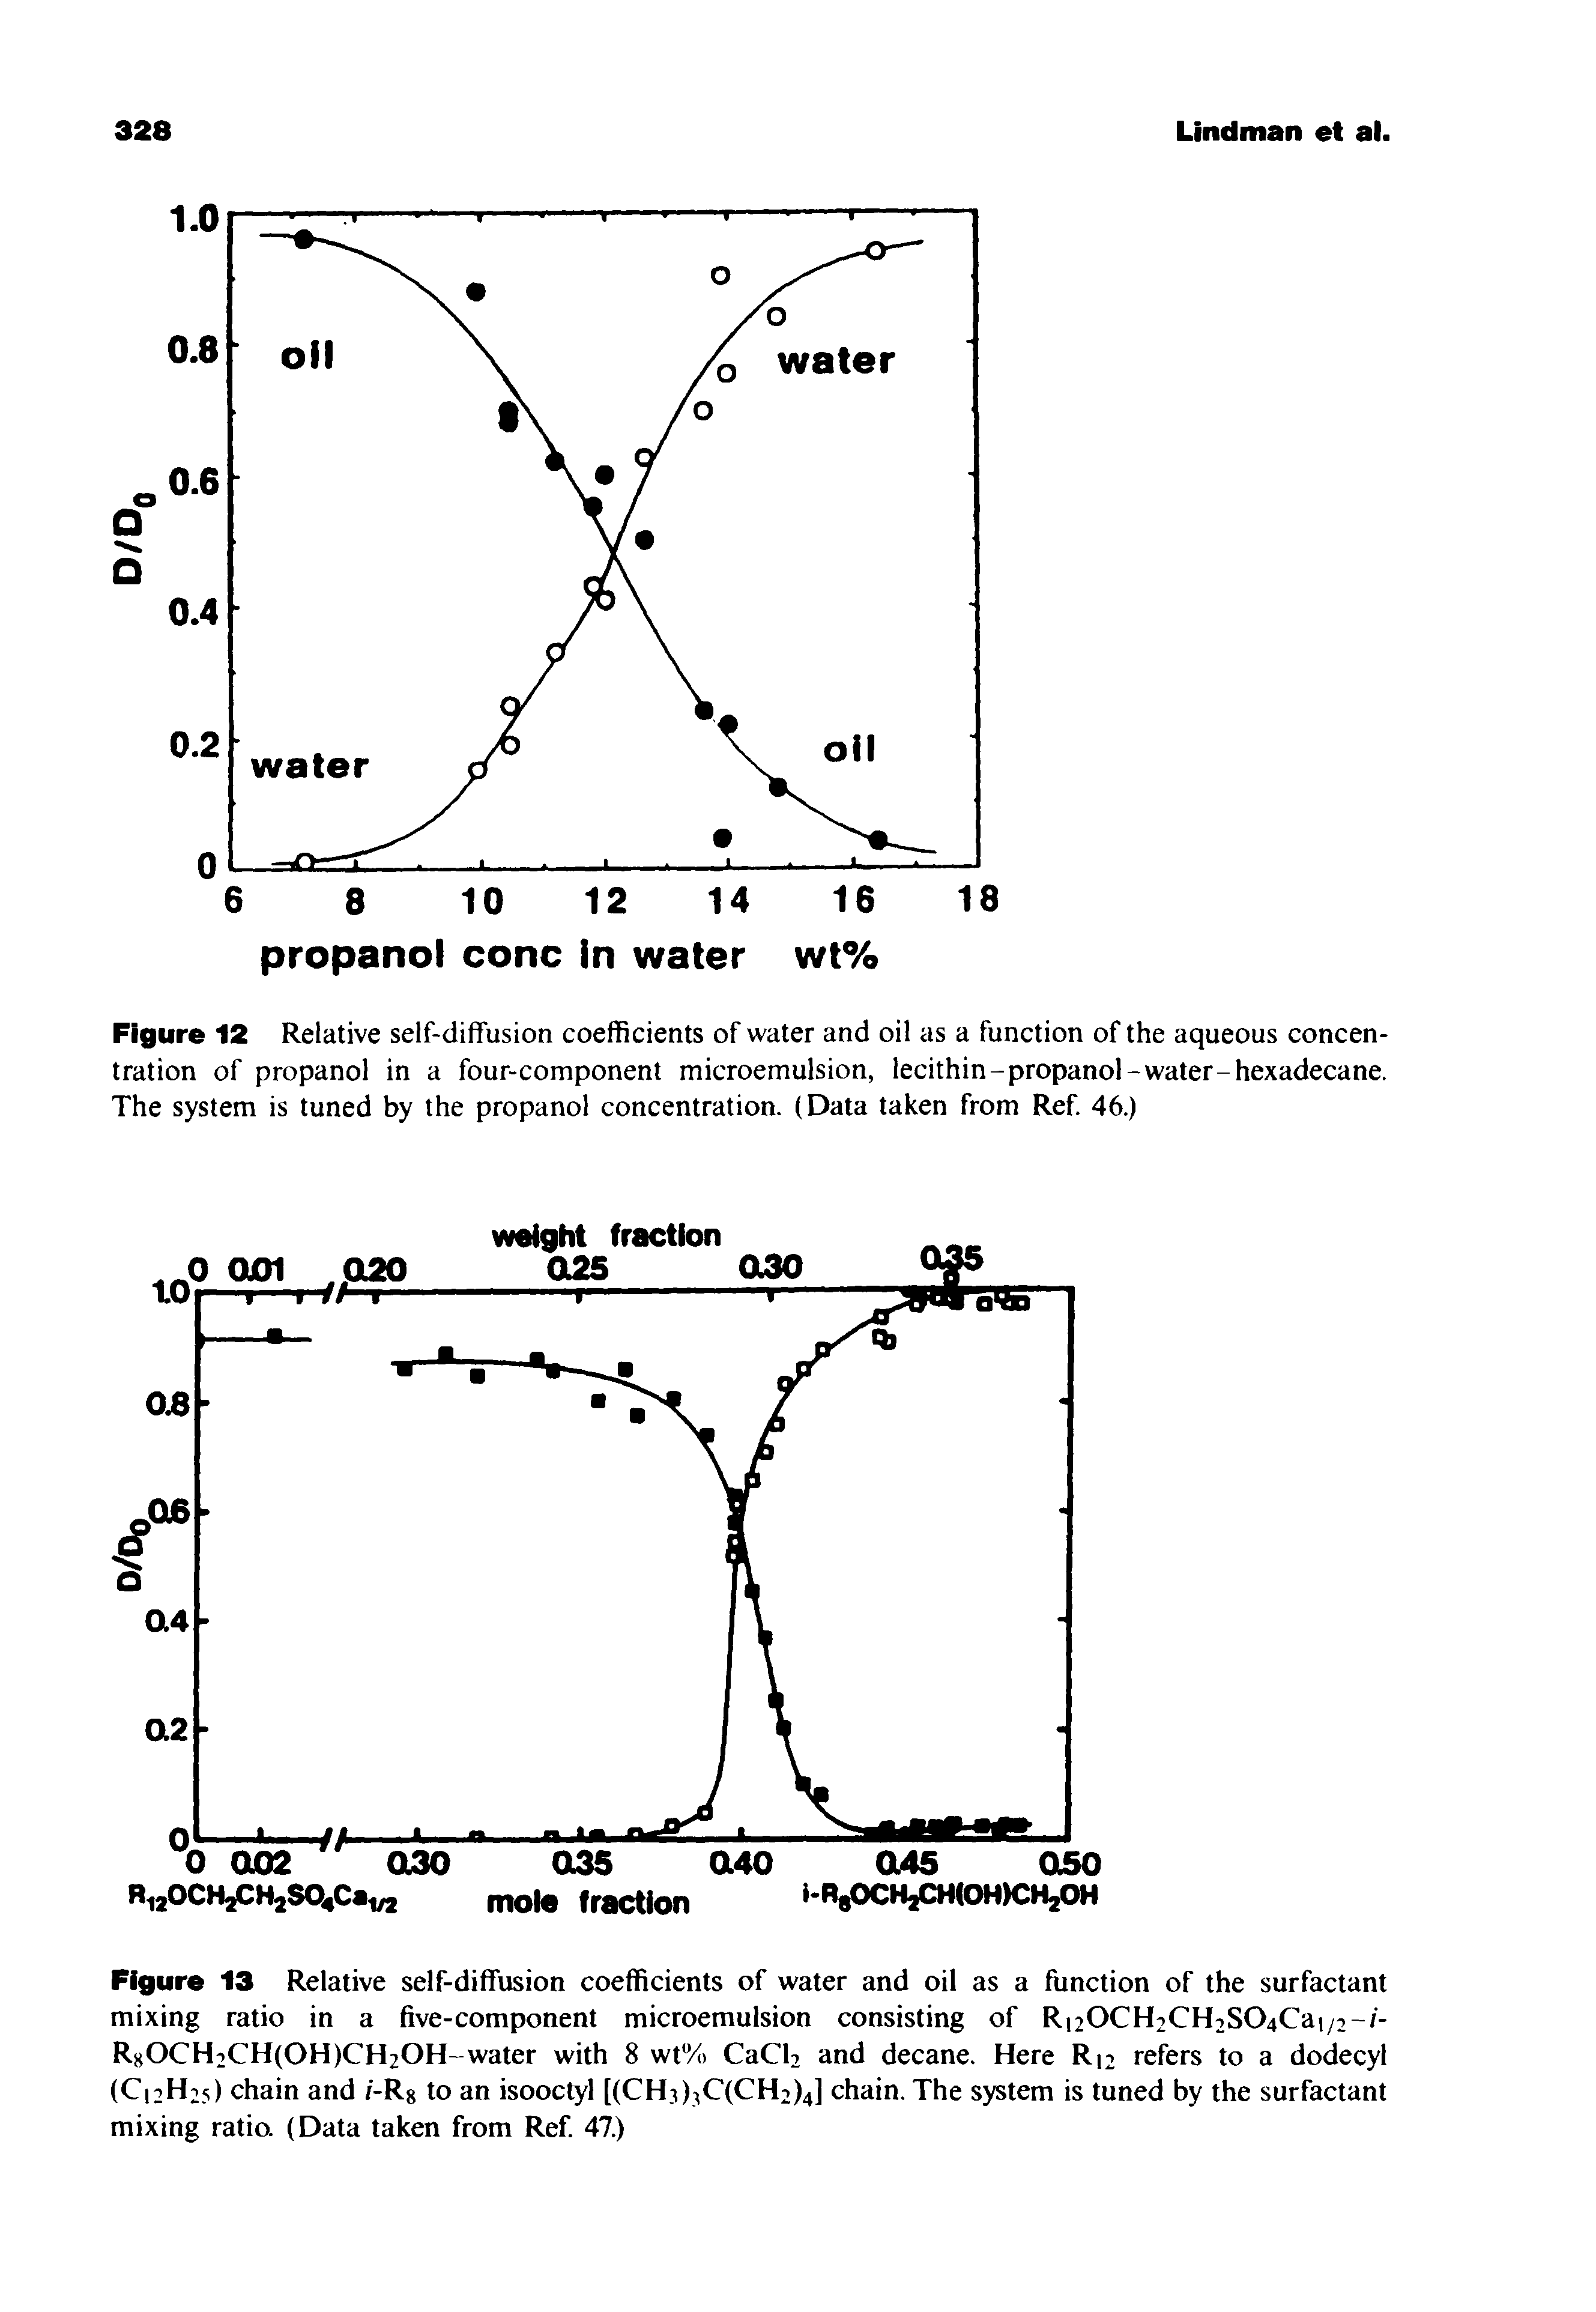 Figure 13 Relative self-diffusion coefficients of water and oil as a function of the surfactant mixing ratio in a five-component microemulsion consisting of Ri20CH2CH2S04Cai/2-/-R80CH2CH(0H)CH20H-water with 8 wt% CaCh and decane. Here R12 refers to a dodecyl (C12H25) chain and /-Rg to an isooctyl ((CHj)jC(CH2)4] chain. The system is tuned by the surfactant mixing ratio (Data taken from Ref 47.)...